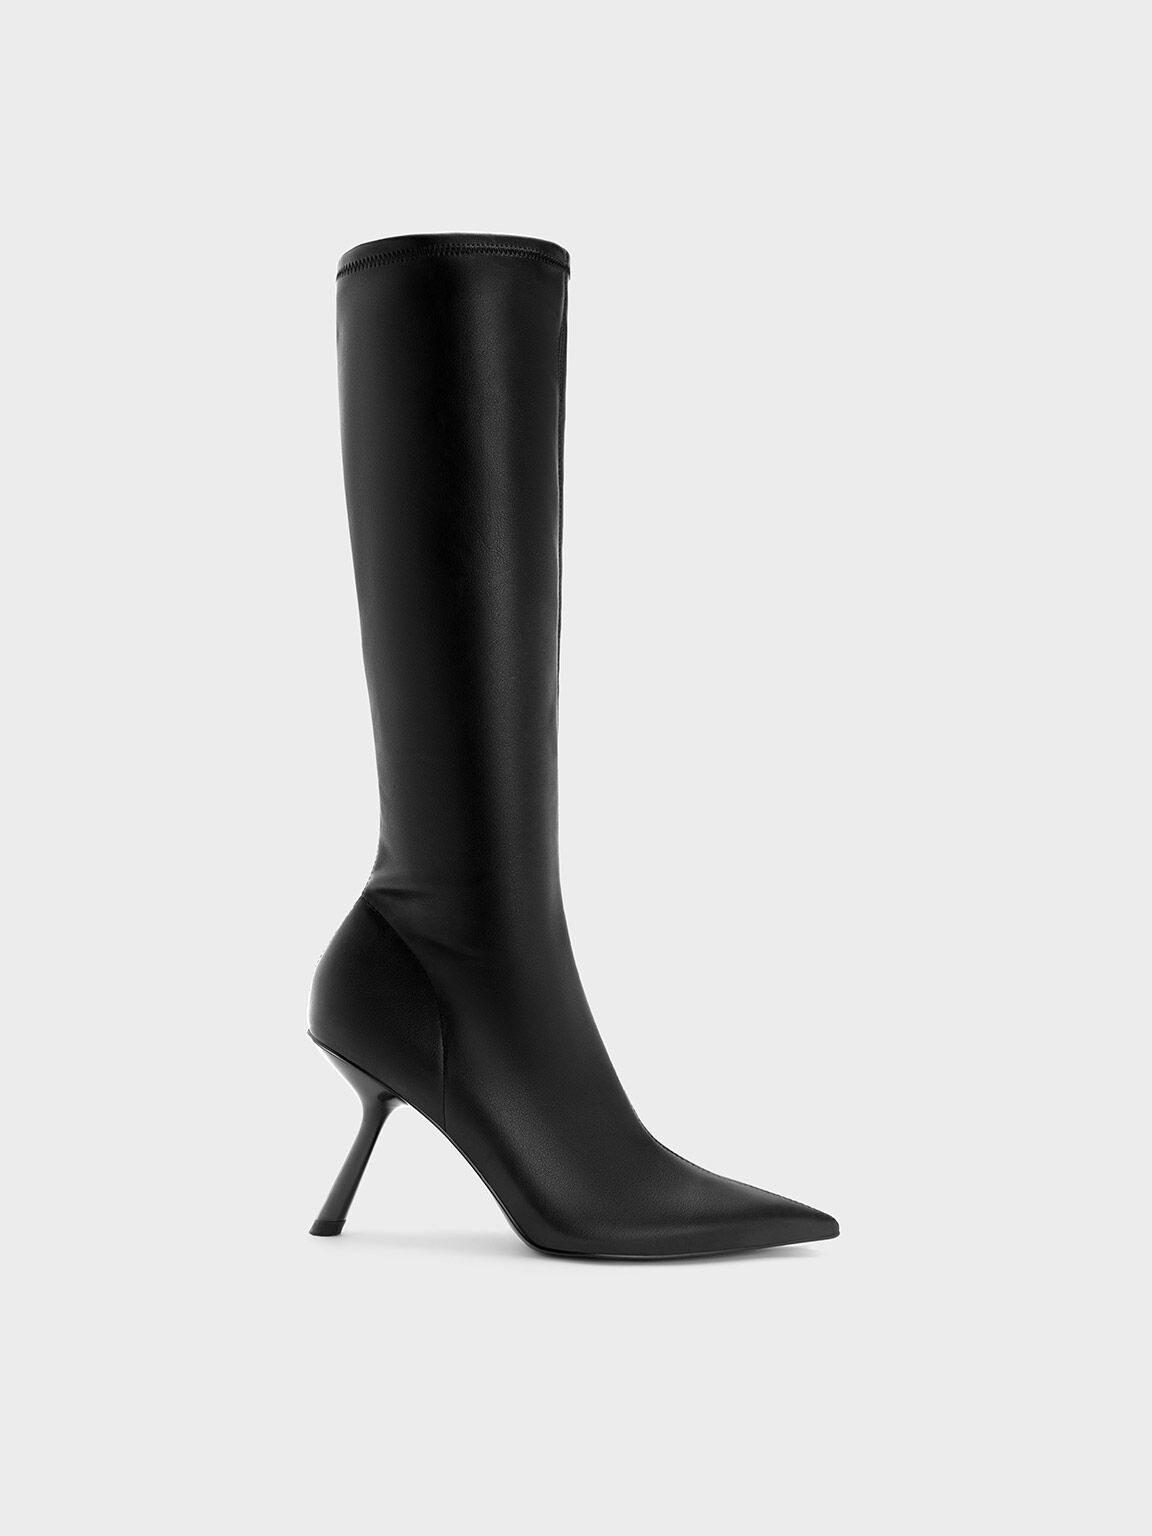 FASDNENDYS Knee-high Boots for Women Shoes Knee-High India | Ubuy